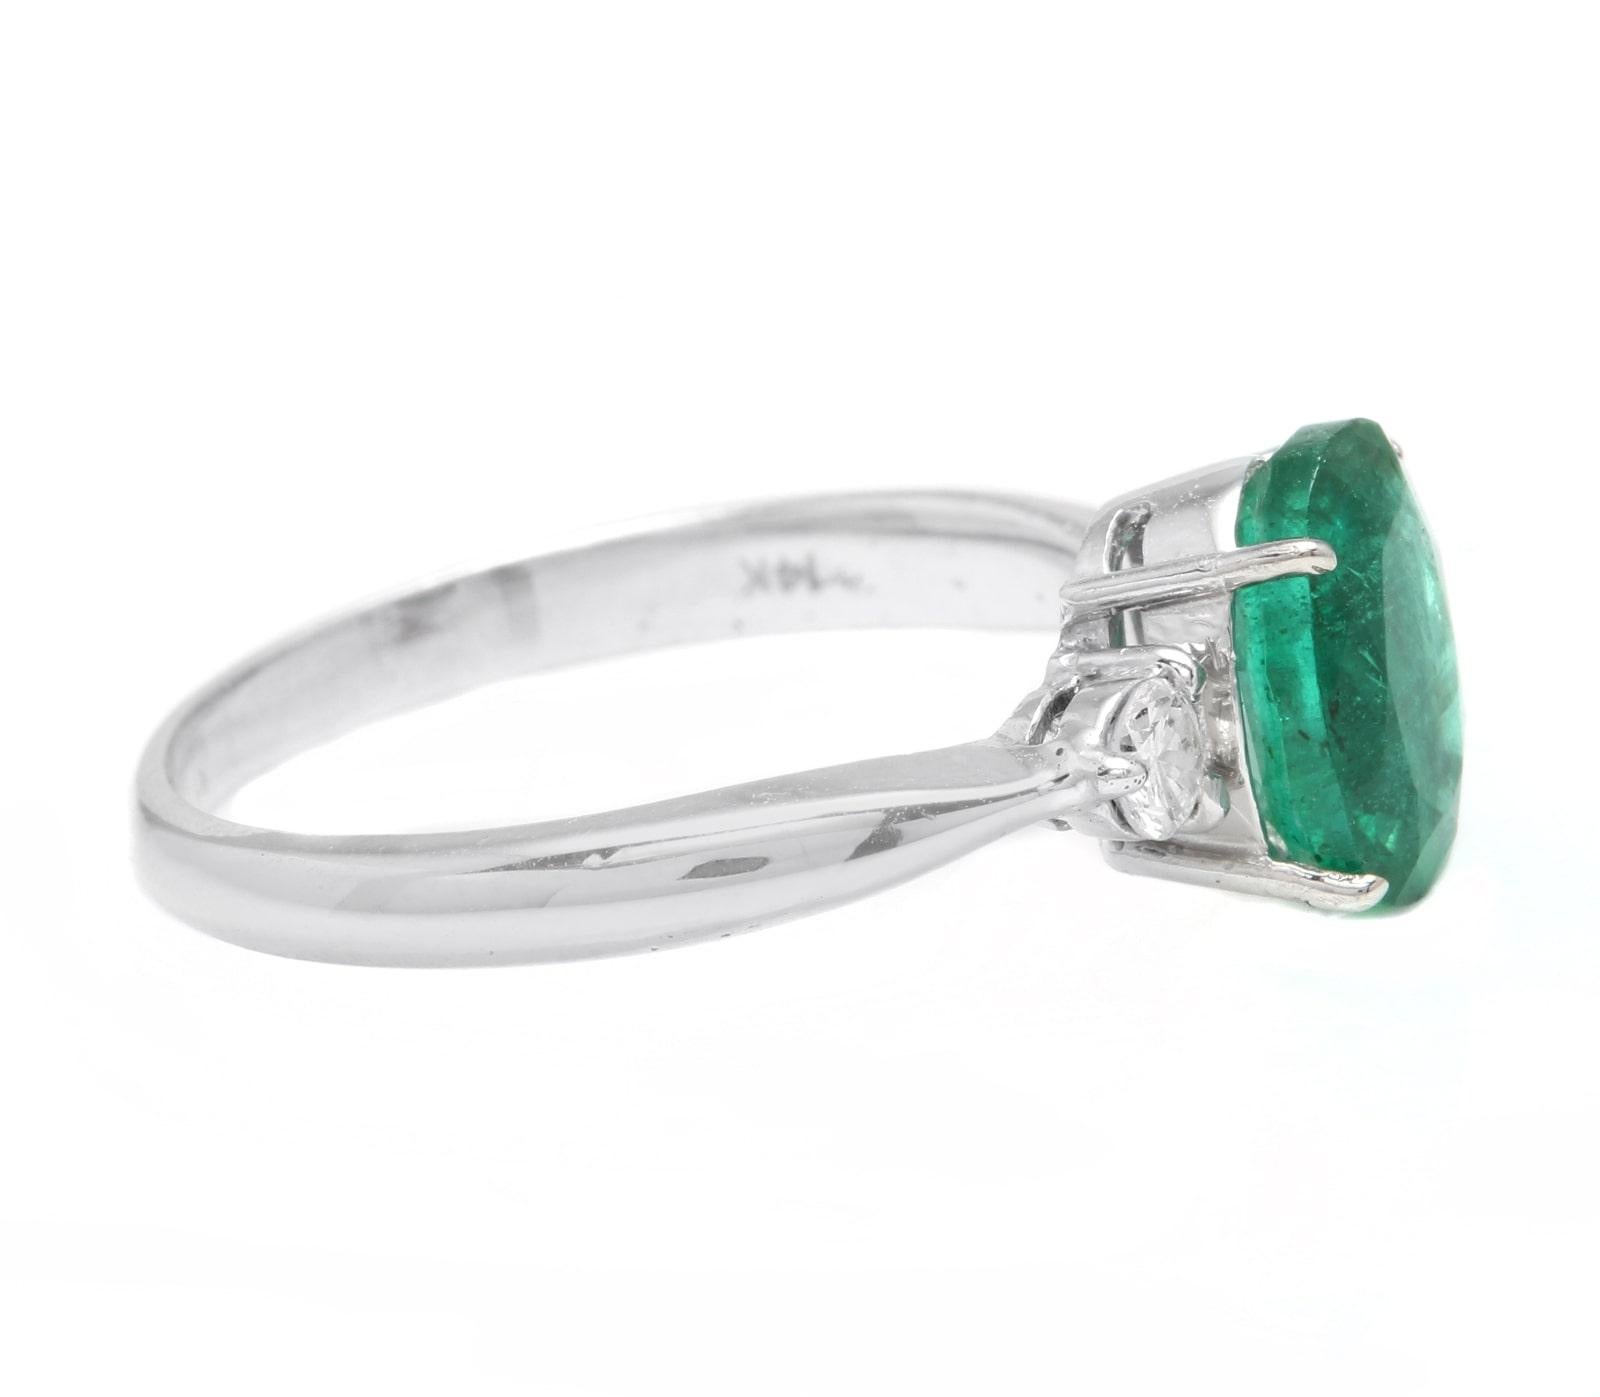 Mixed Cut 1.24 Carats Exquisite Emerald and Diamond 14K Solid White Gold Ring For Sale